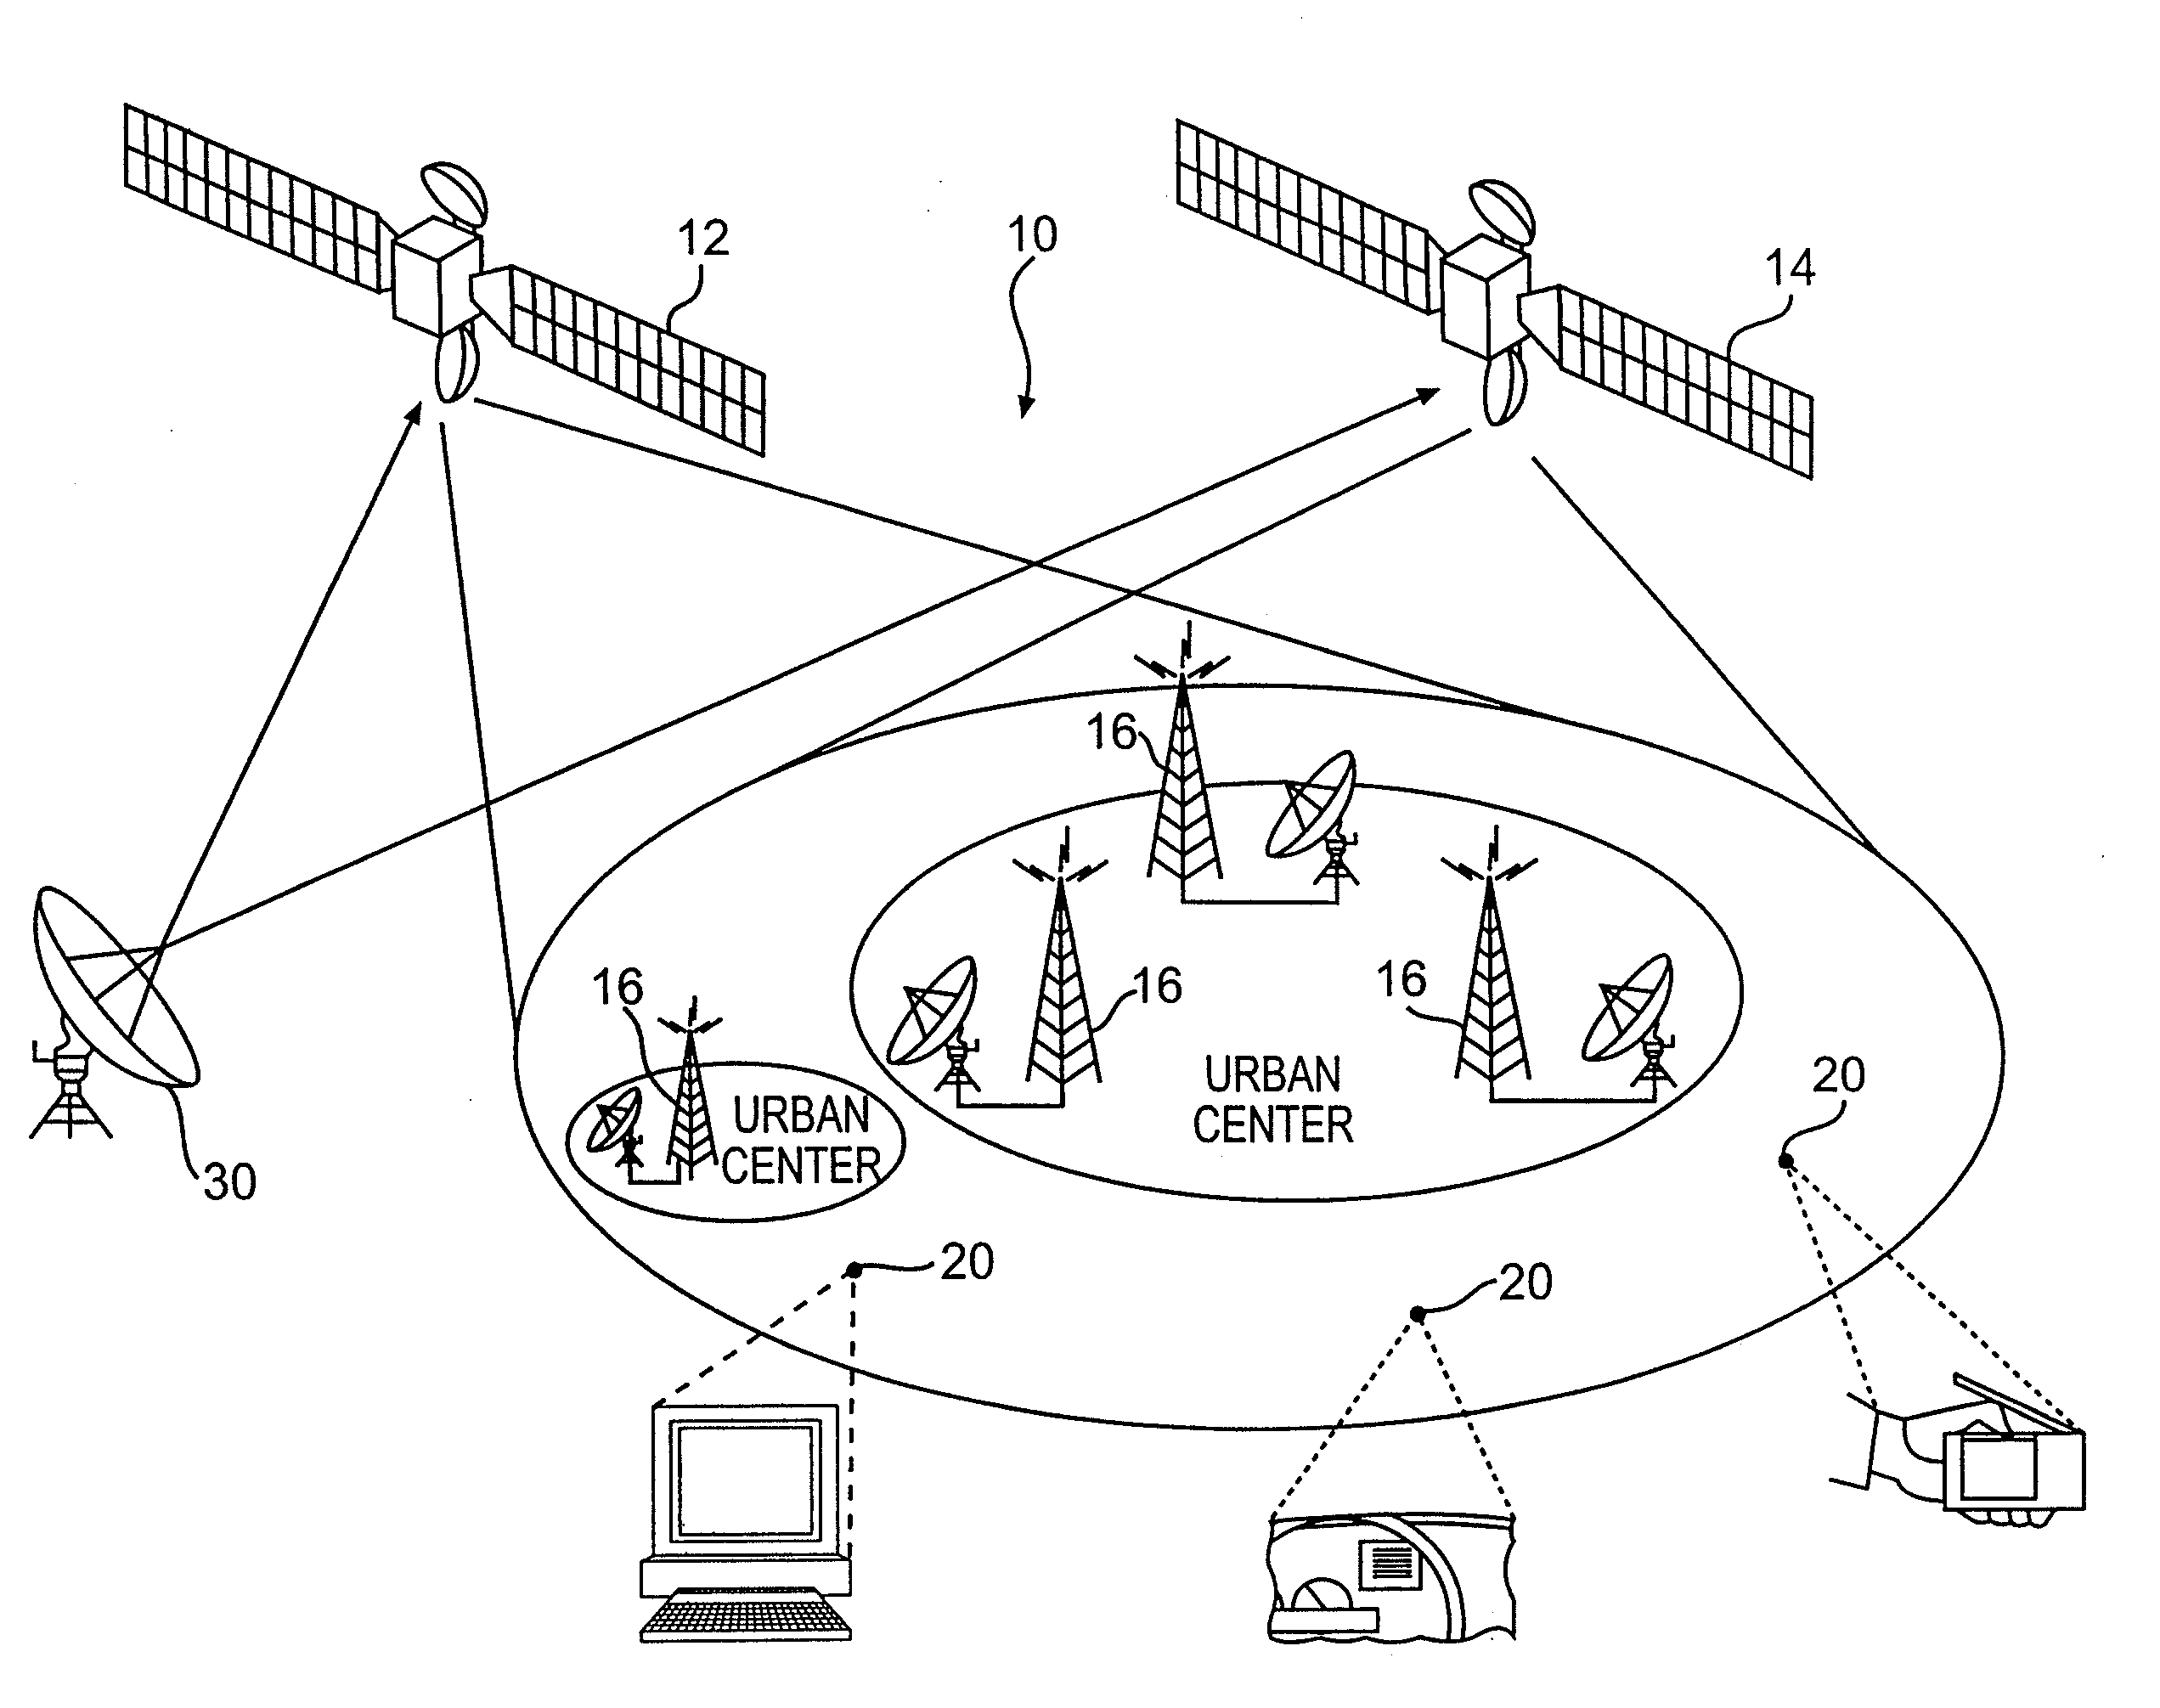 System and Method for Mobile Commerce